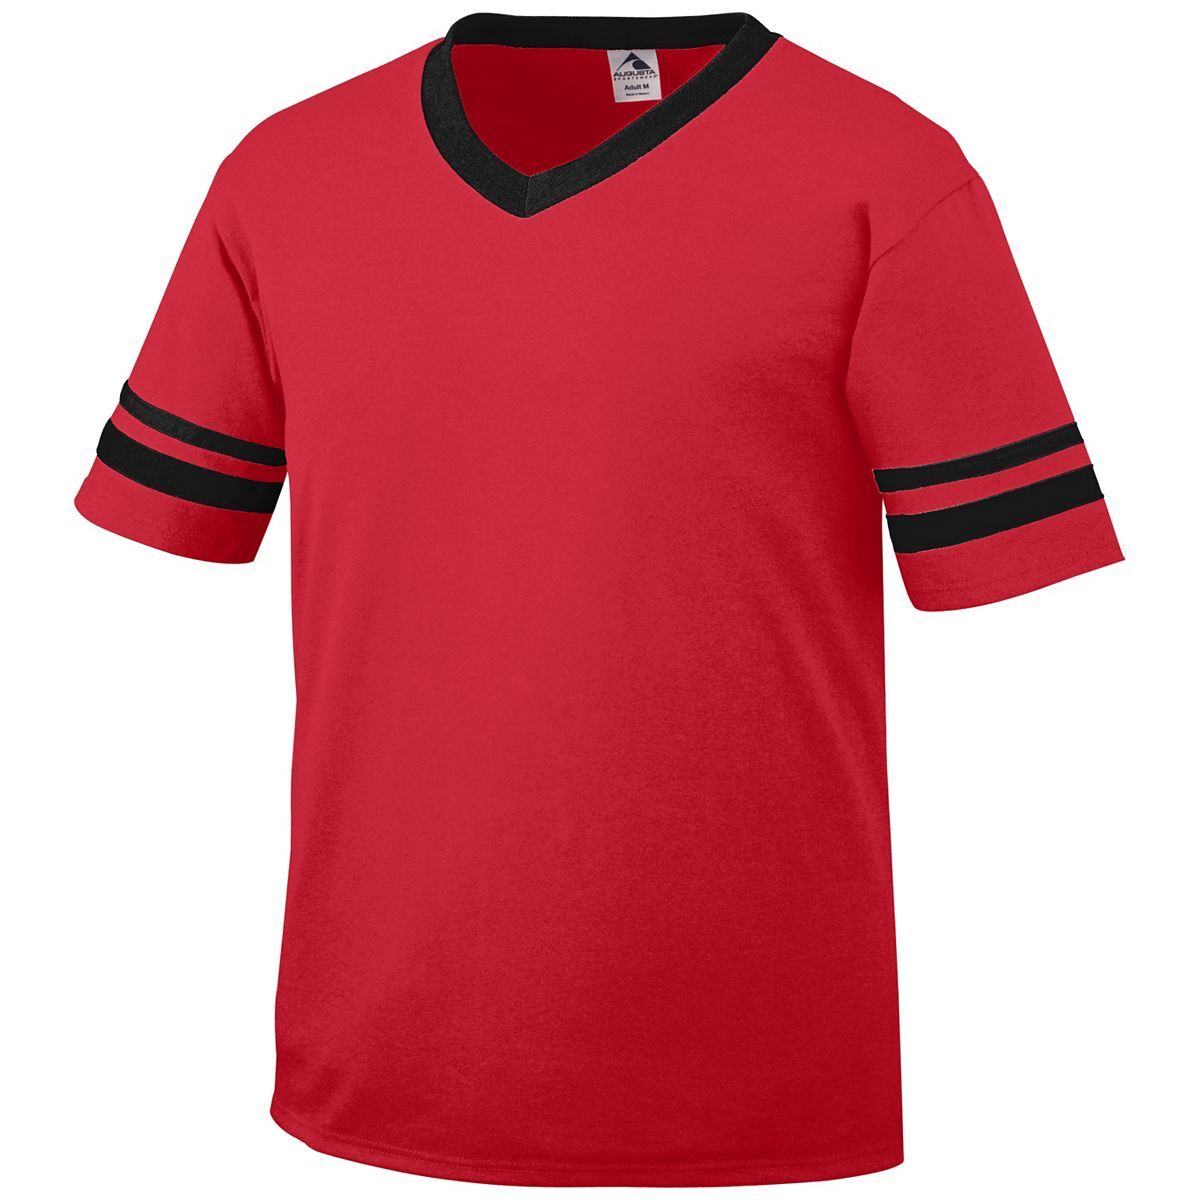 Augusta Sportswear Youth Sleeve Stripe Jersey in Red/Black  -Part of the Youth, Youth-Jersey, Augusta-Products, Shirts product lines at KanaleyCreations.com